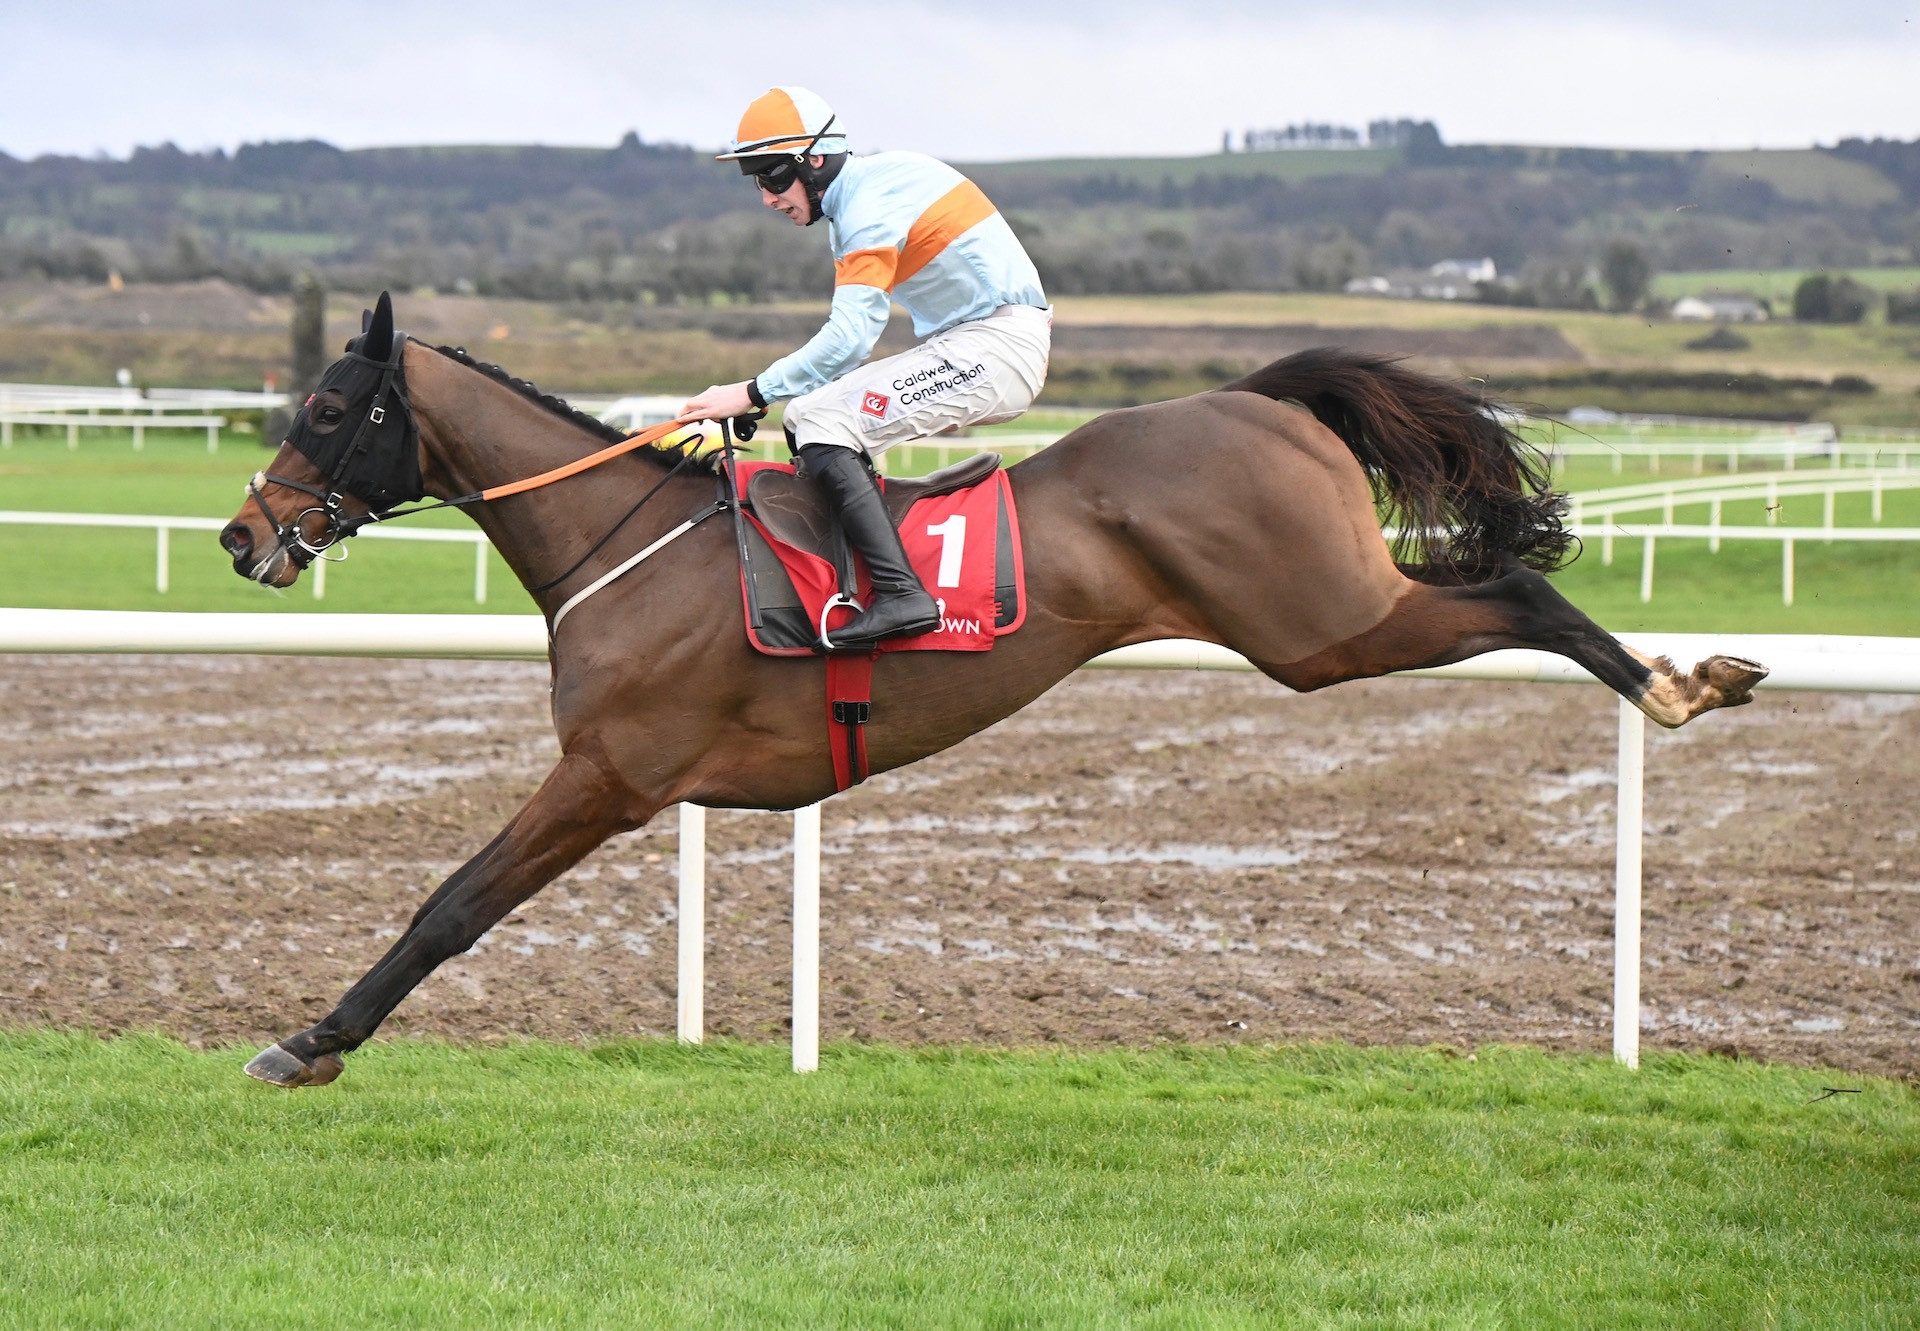 Dysart Dynamo (Westerner) Wins The Bumper At Punchestown